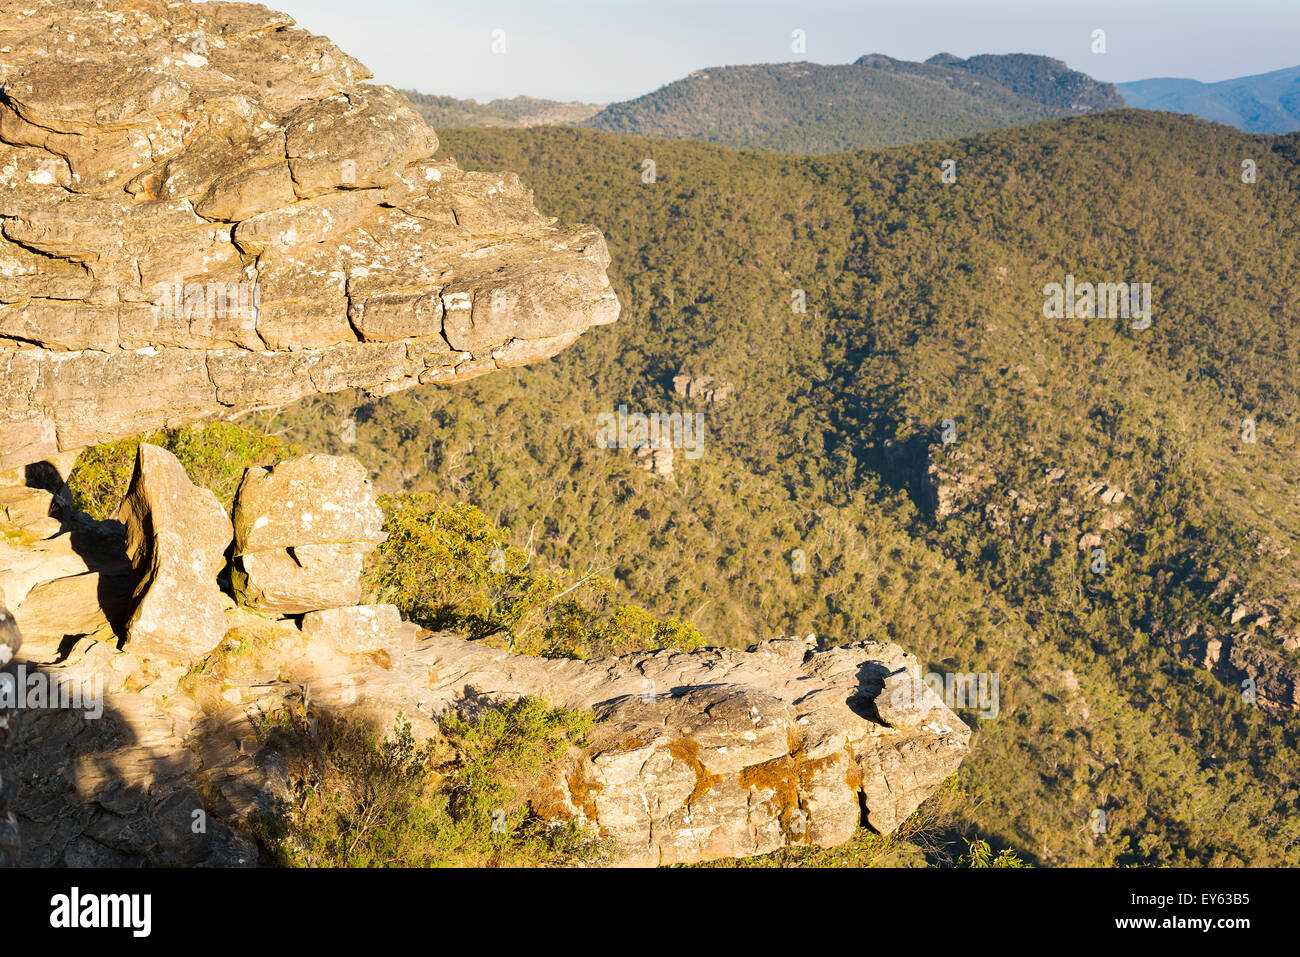 The Balconies lookout in the Grampians National Park, Victoria, Australia Stock Photo